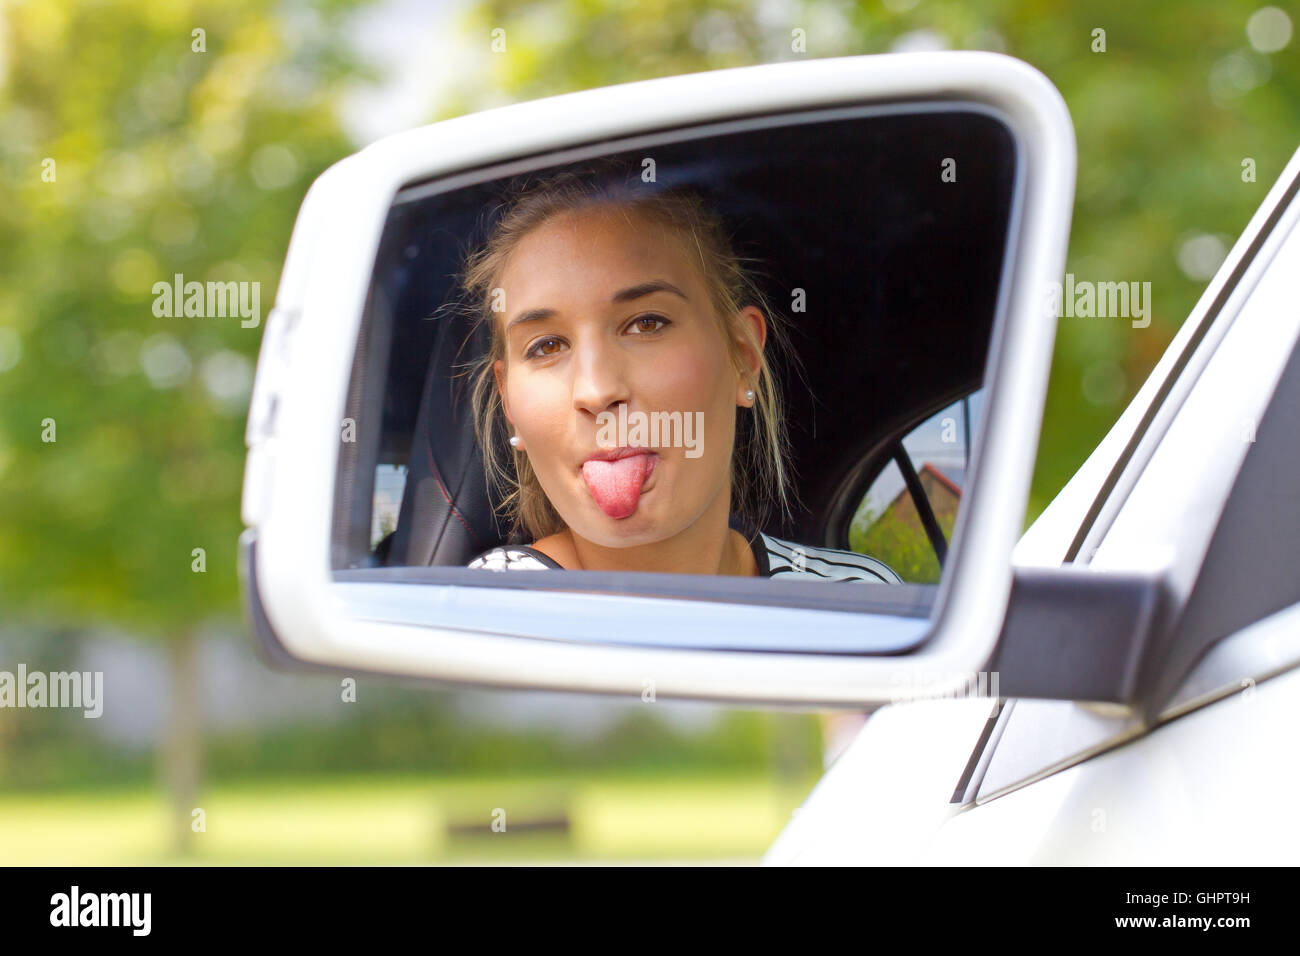 Young woman sticking tongue out in a car mirror Stock Photo